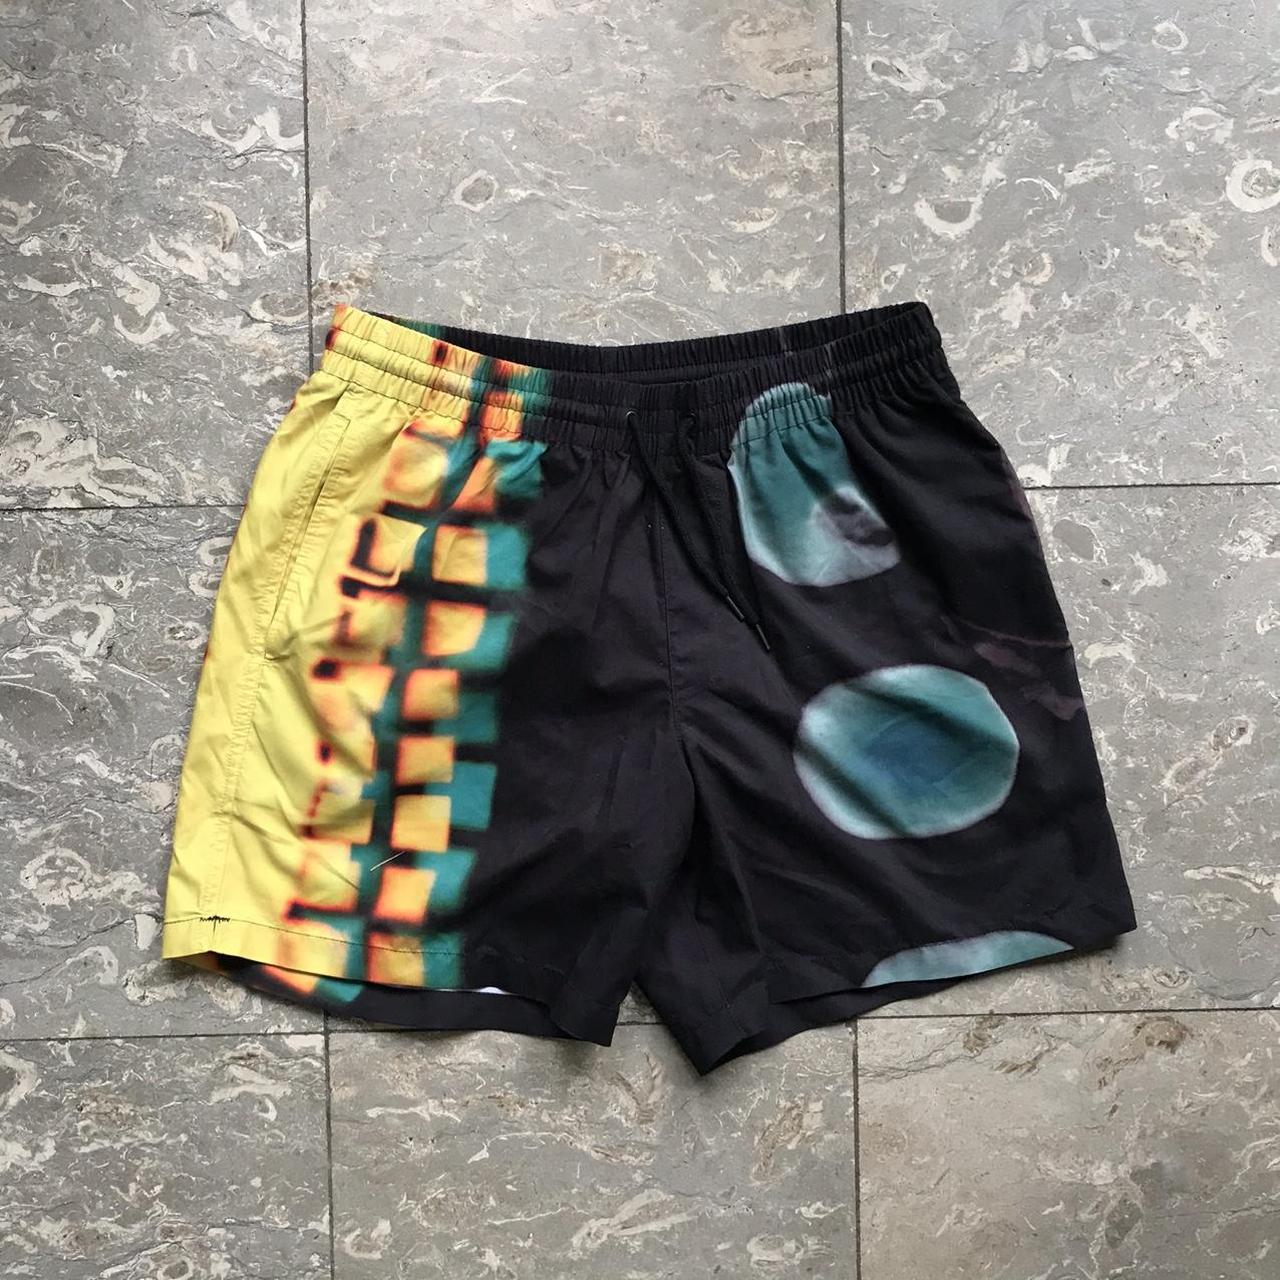 Dries Van Noten Swim Shorts Size Small New With Tags - Depop